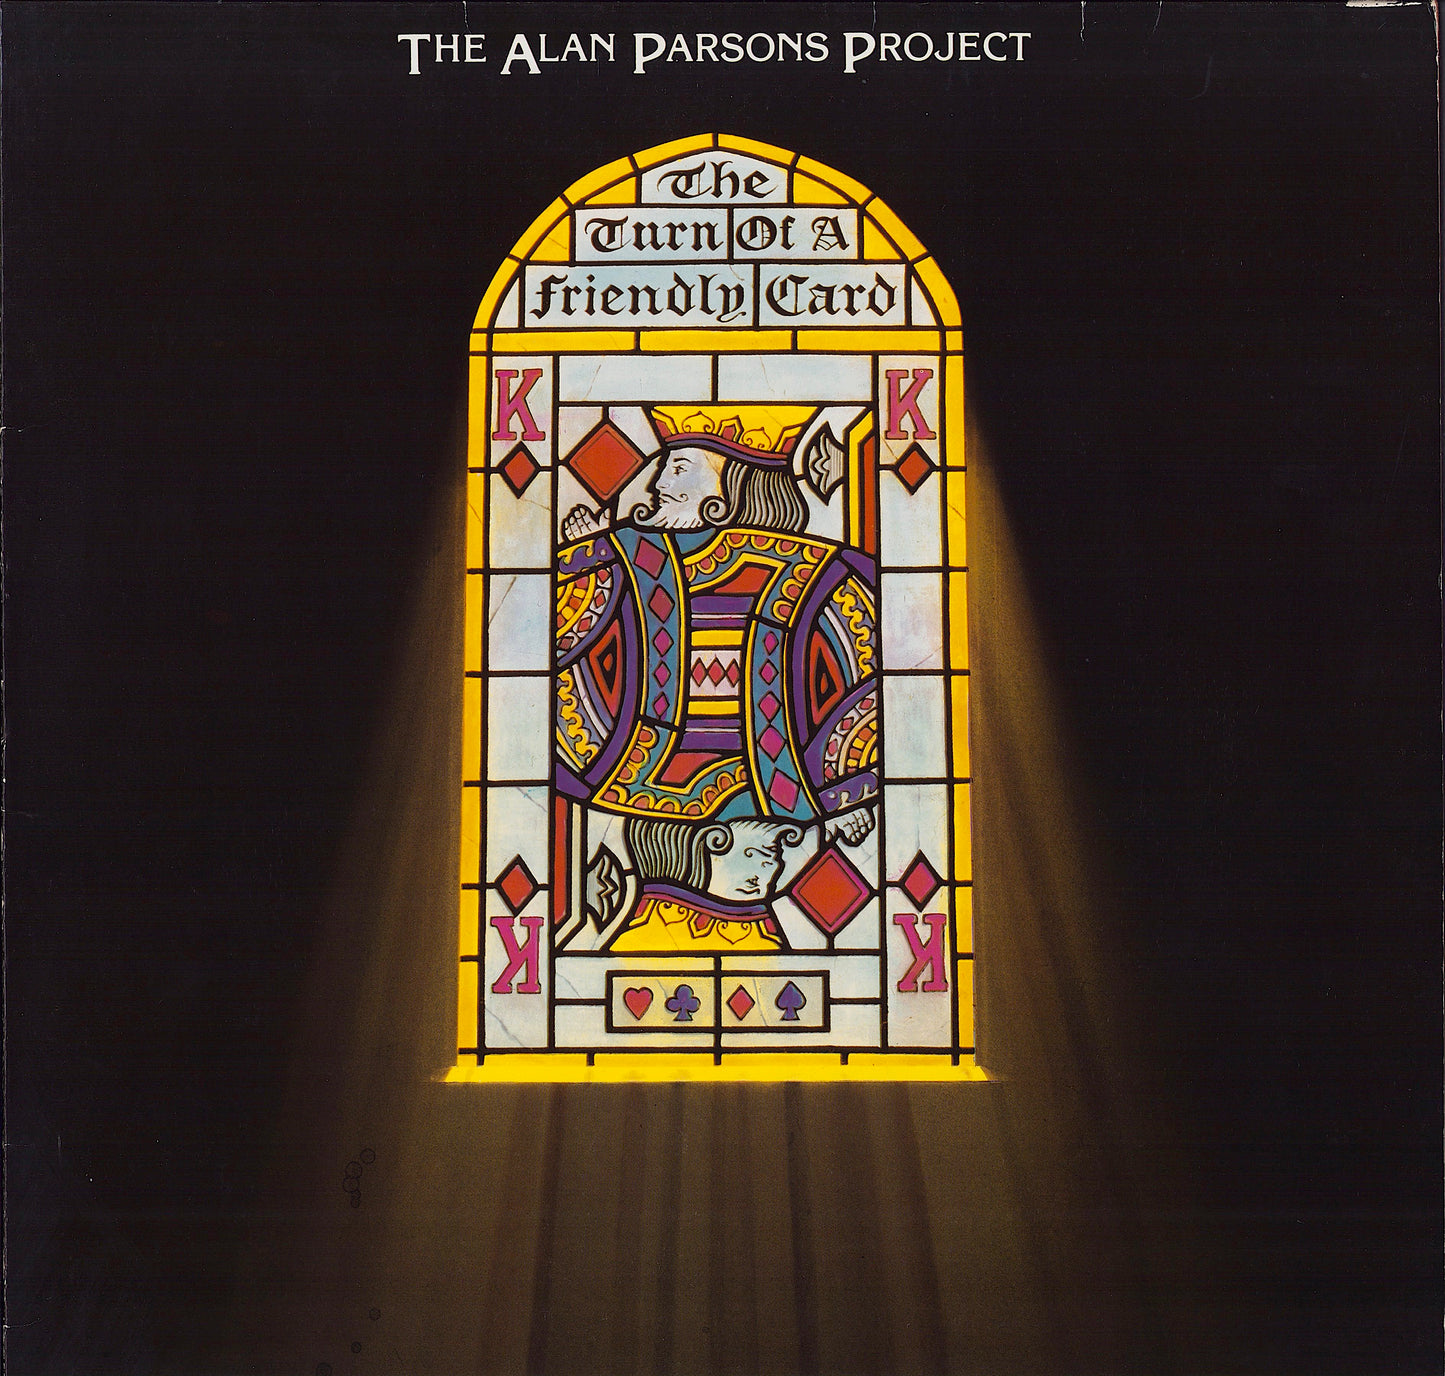 The Alan Parsons Project - The Turn Of A Friendly Card (Vinyl LP) FR